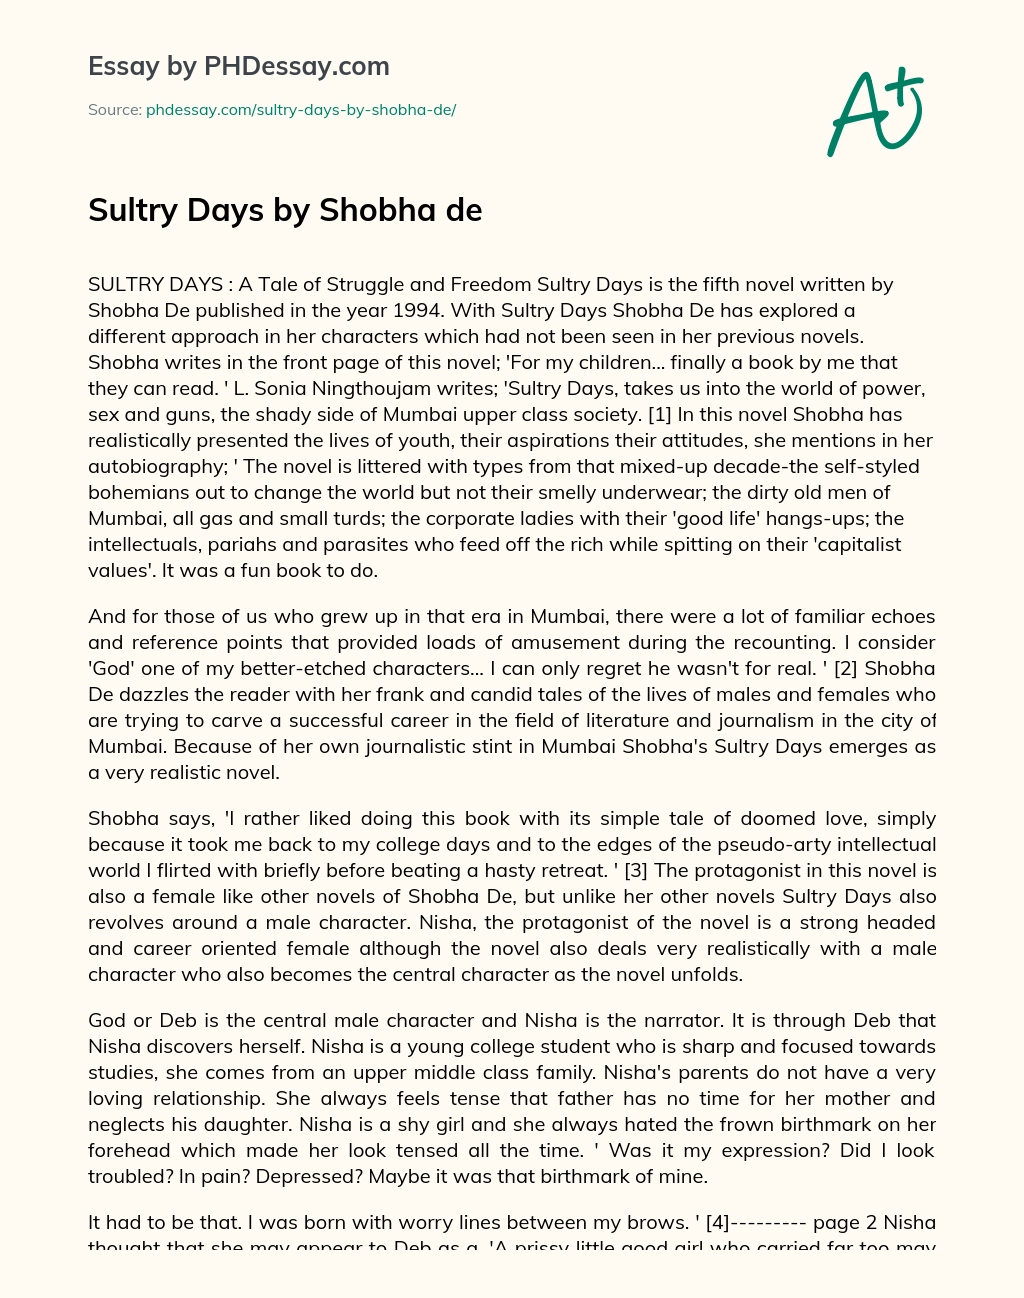 Sultry Days by Shobha de essay